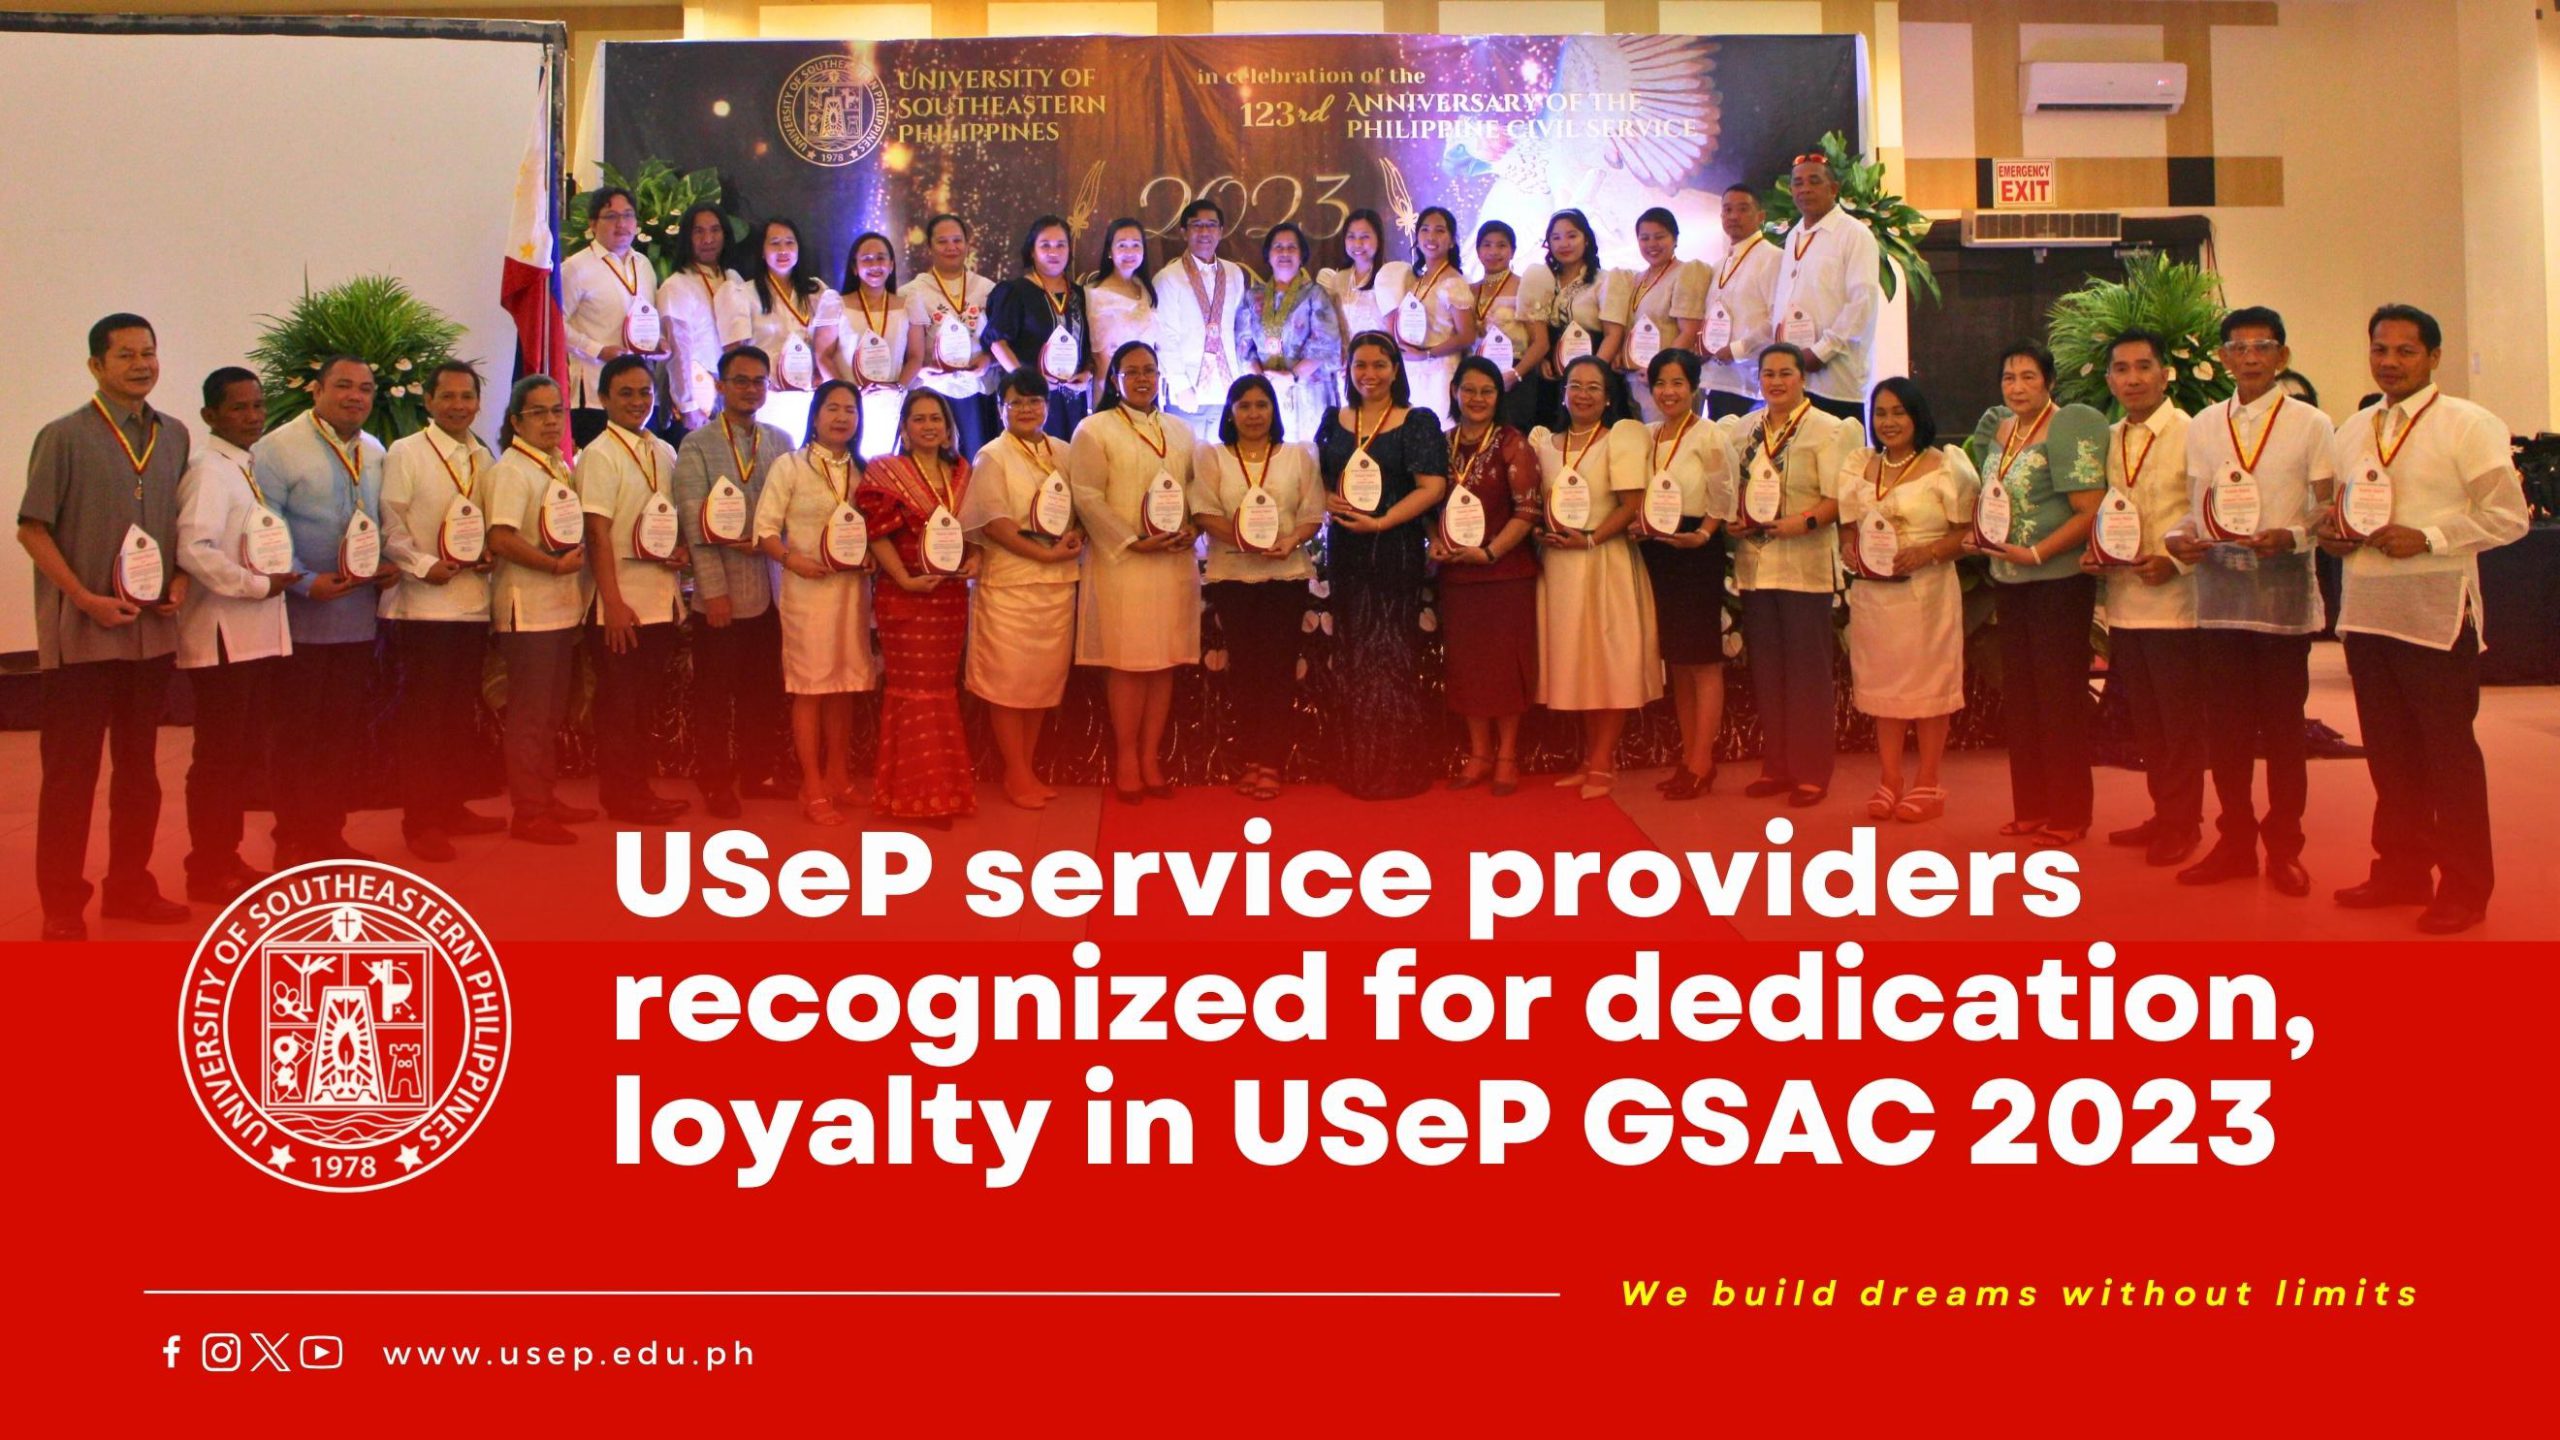 USeP service providers recognized for dedication, loyalty in USeP GSAC 2023